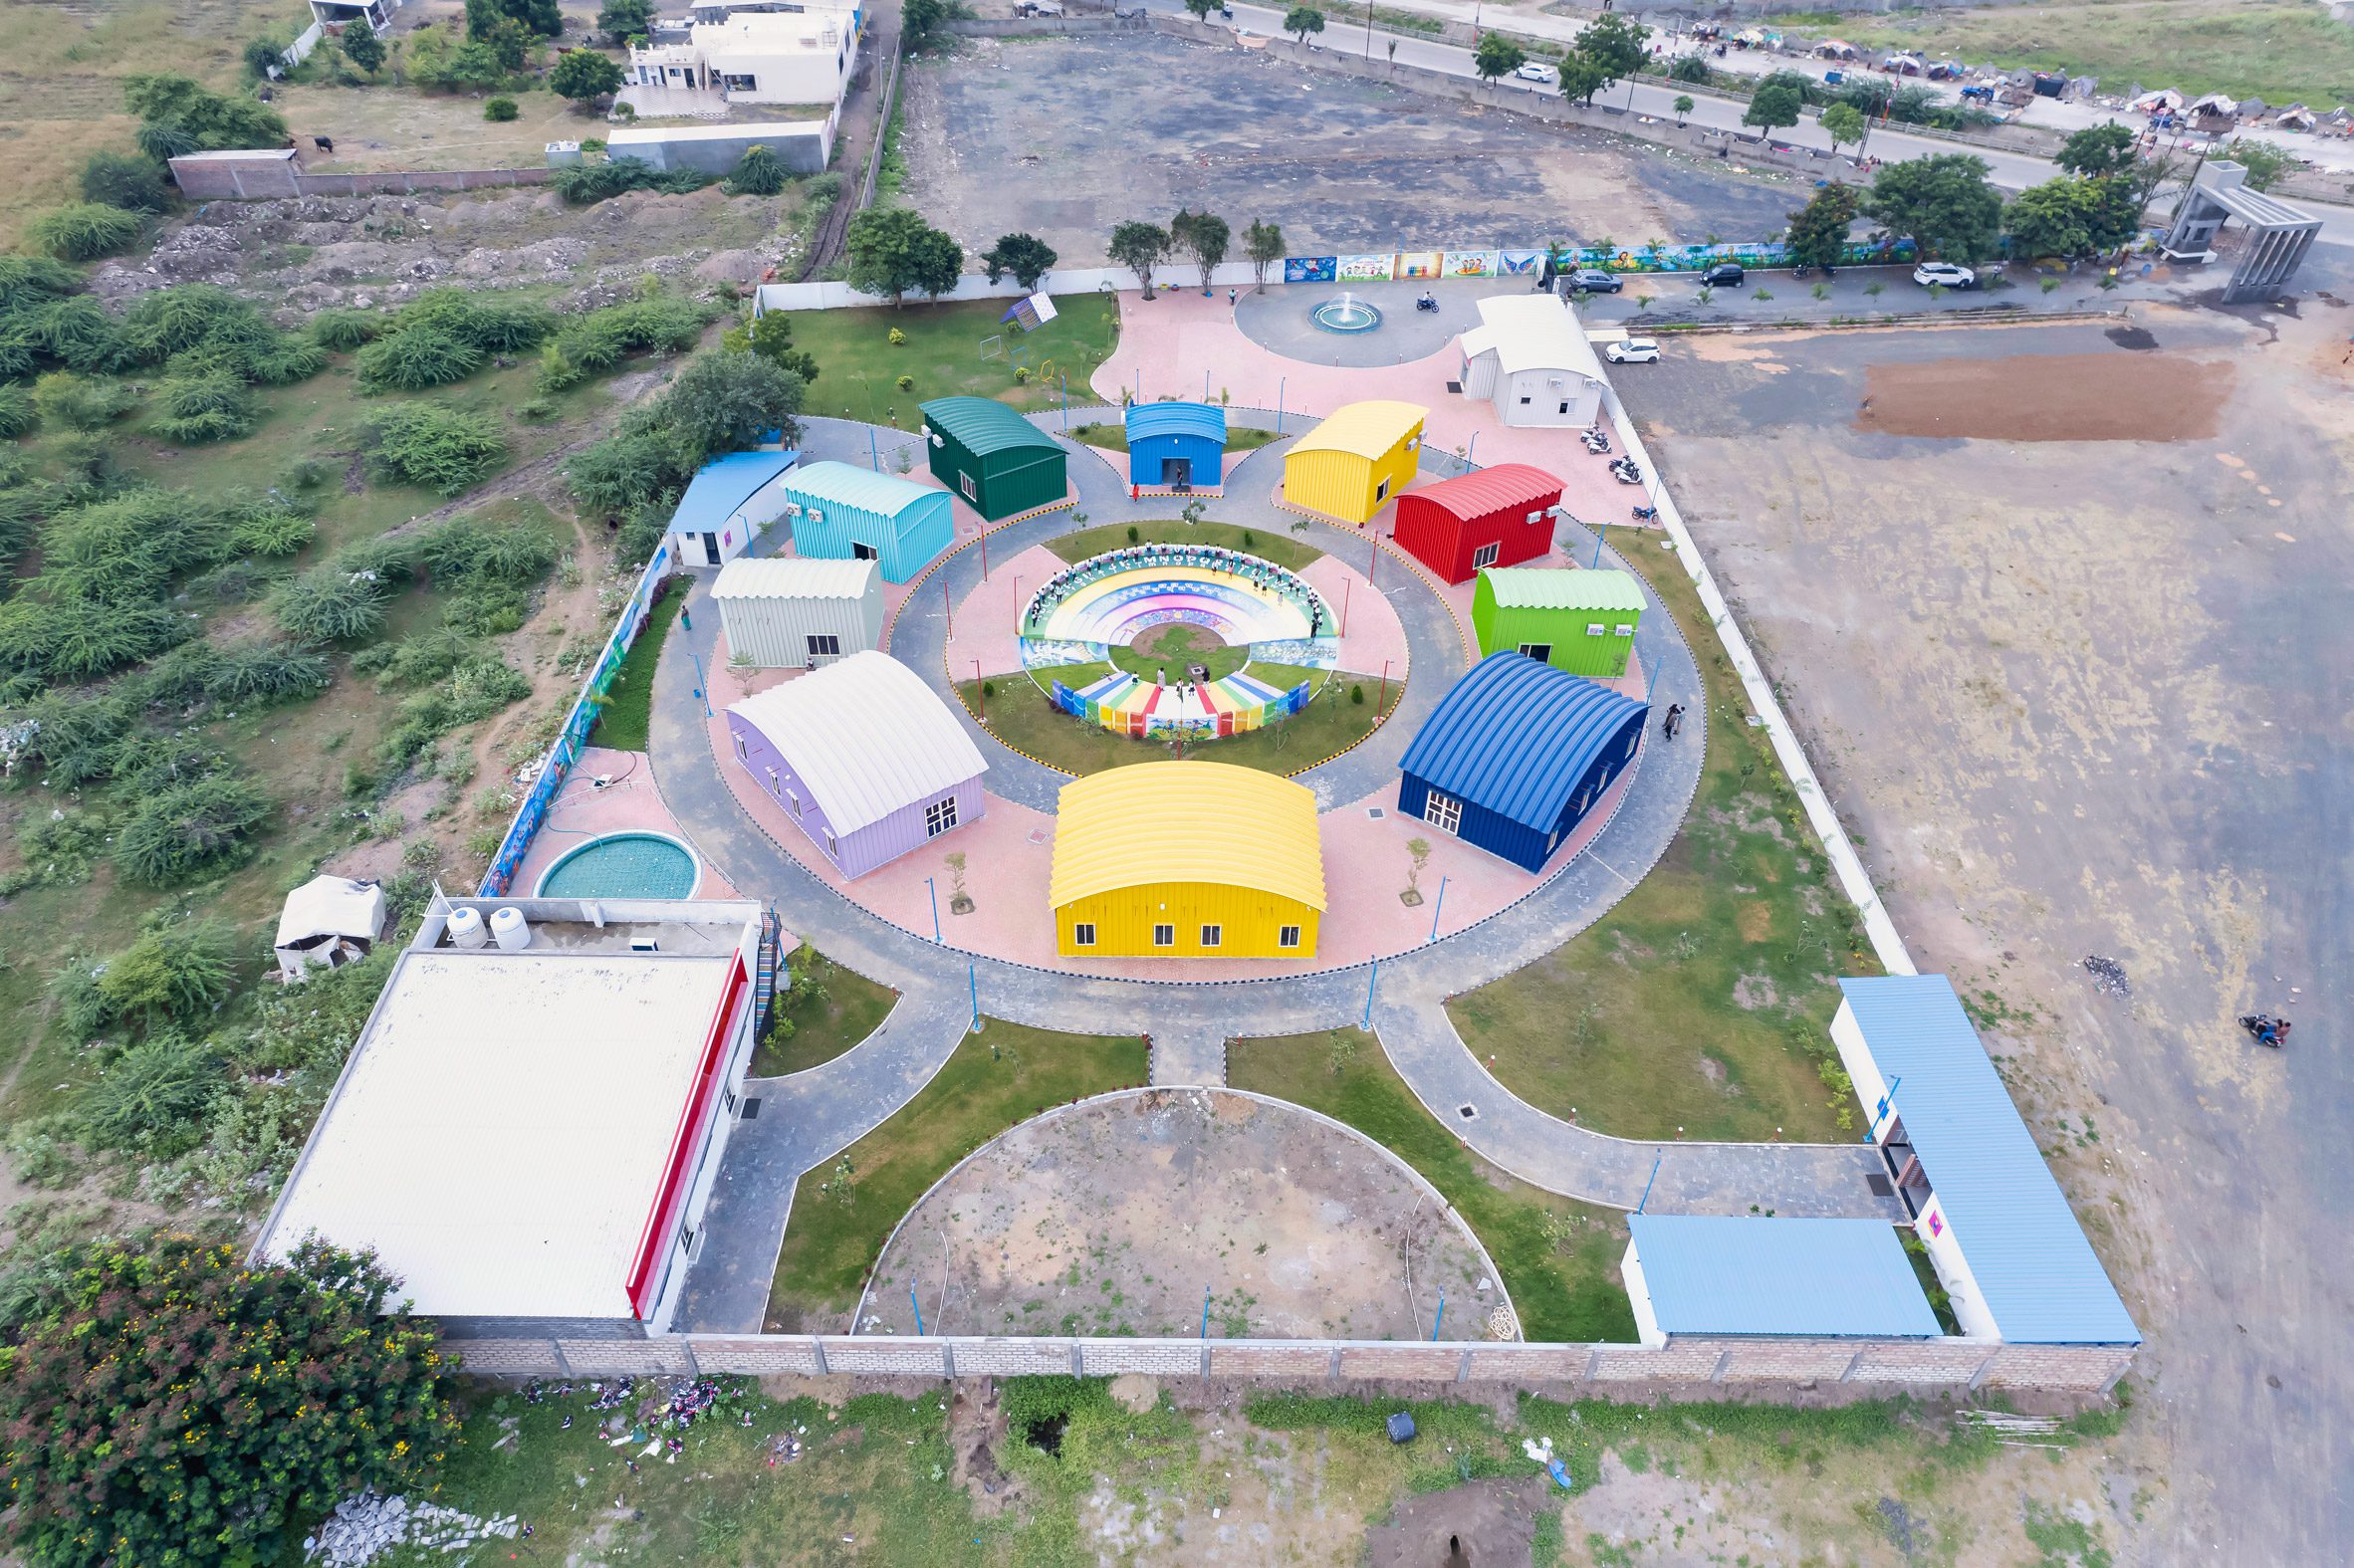 Colour steel classroom structures arranged in a circle around an amphitheatre